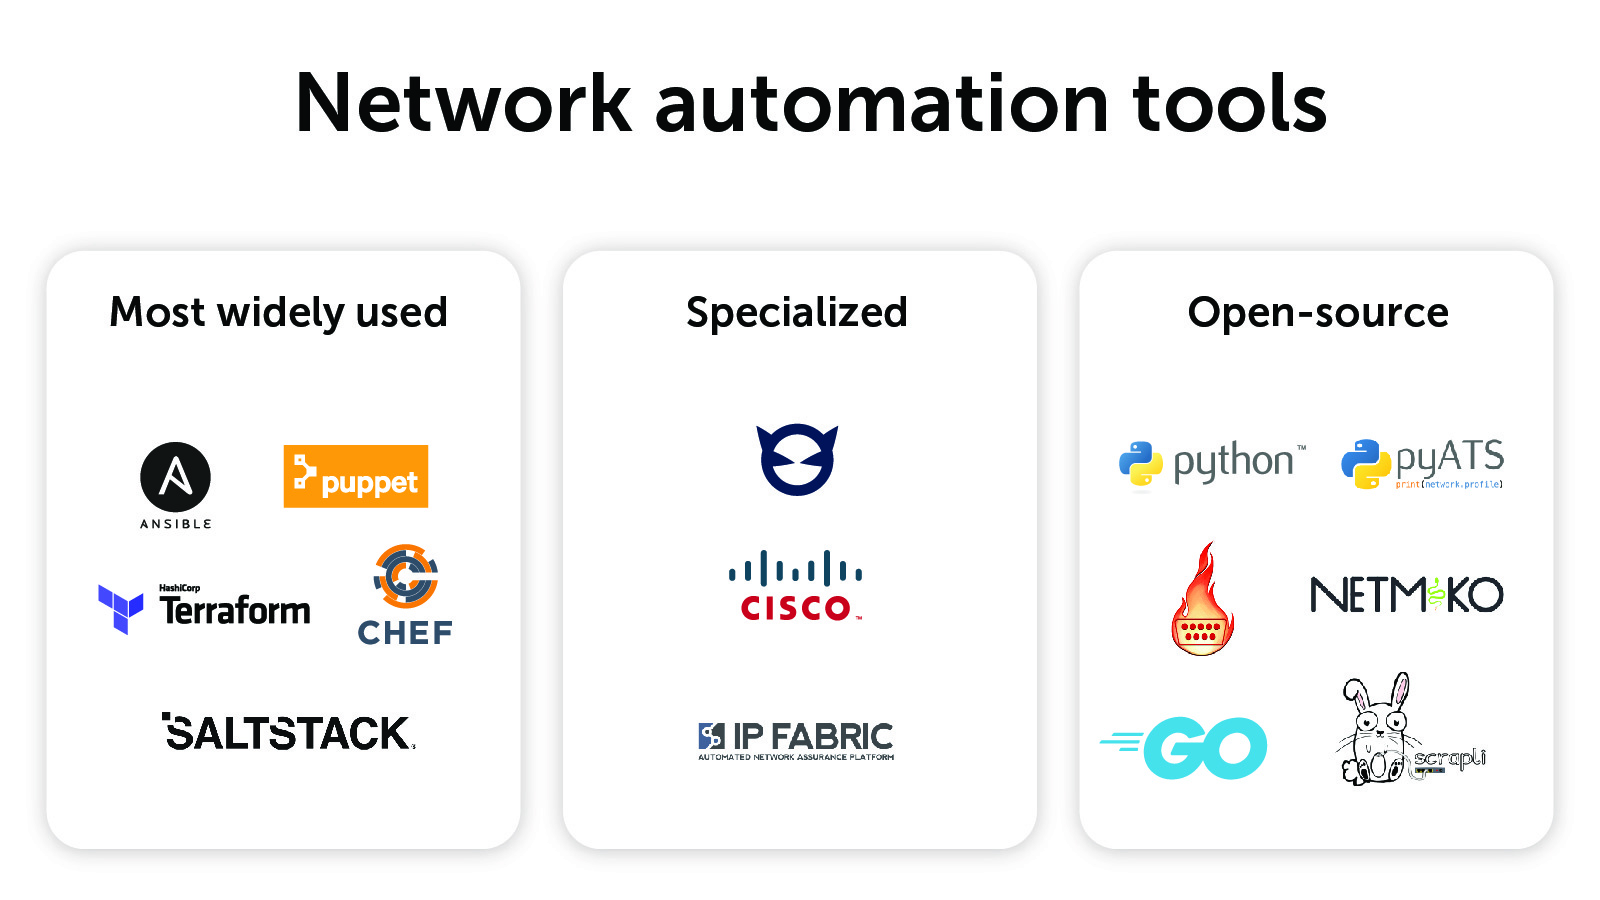 Logos of network automation tools, including most widely used, specialized, and open-source